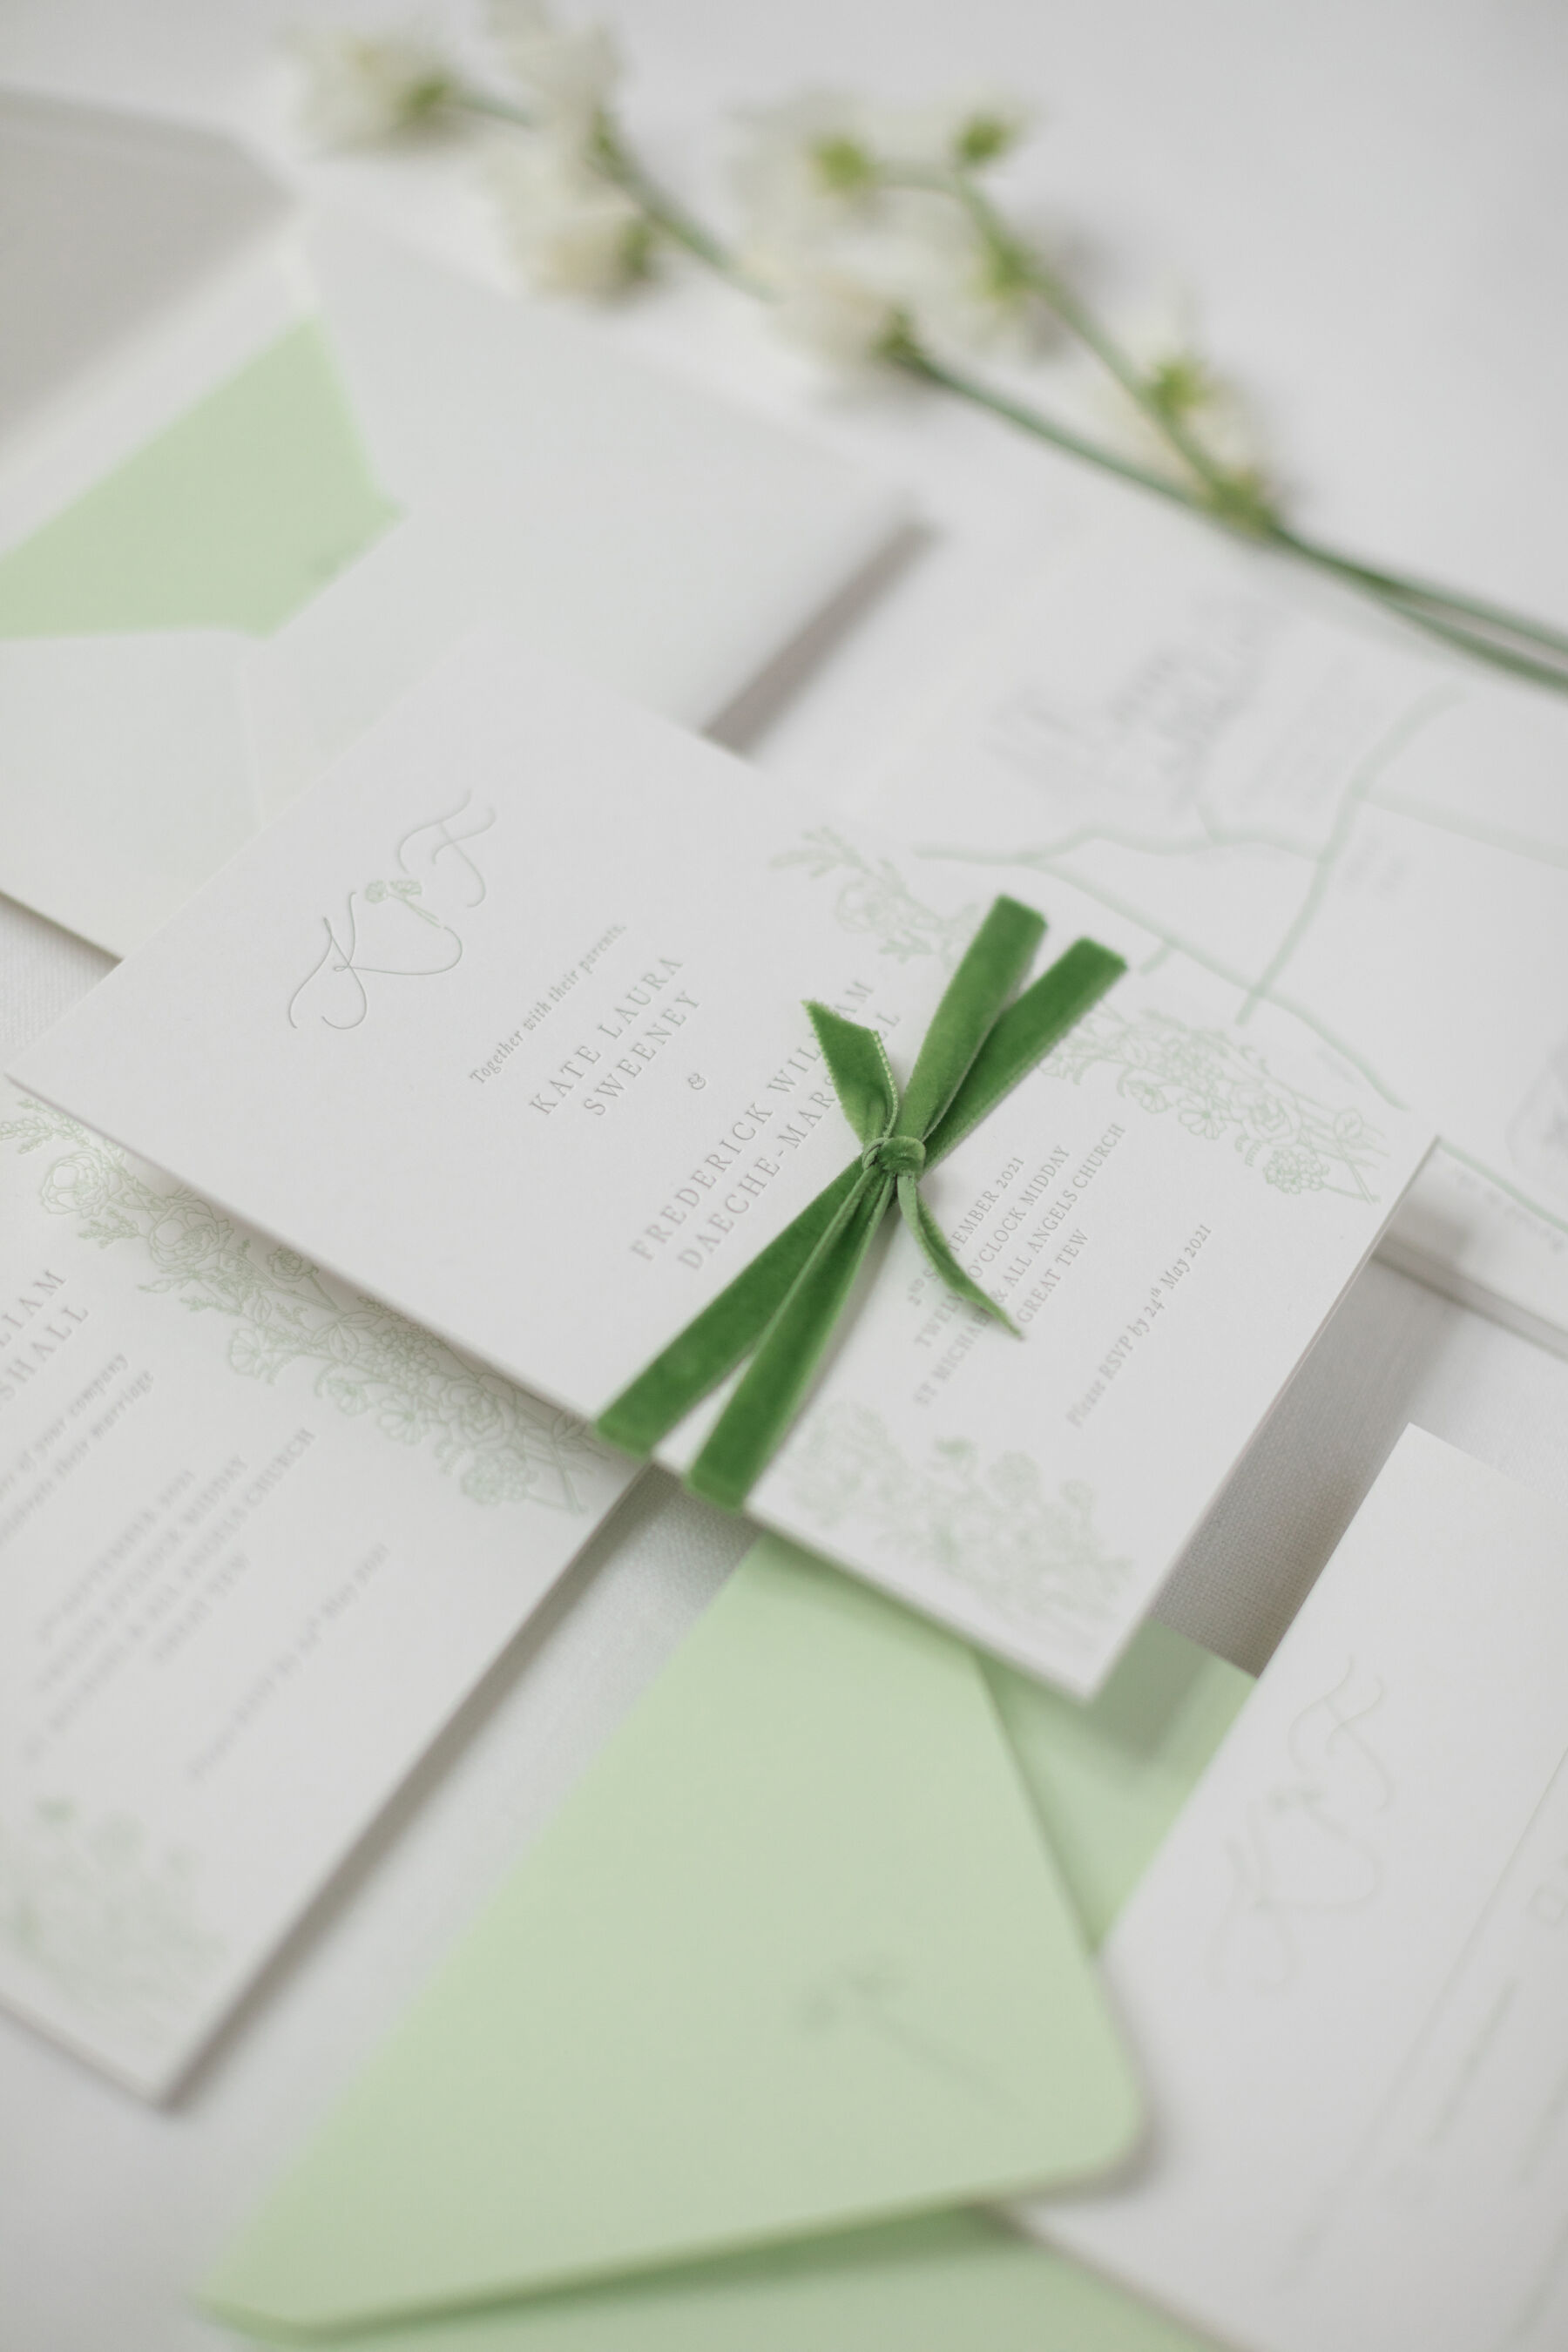 Bespoke Letterpress Printed wedding invitation suite with a bespoke hand drawn map